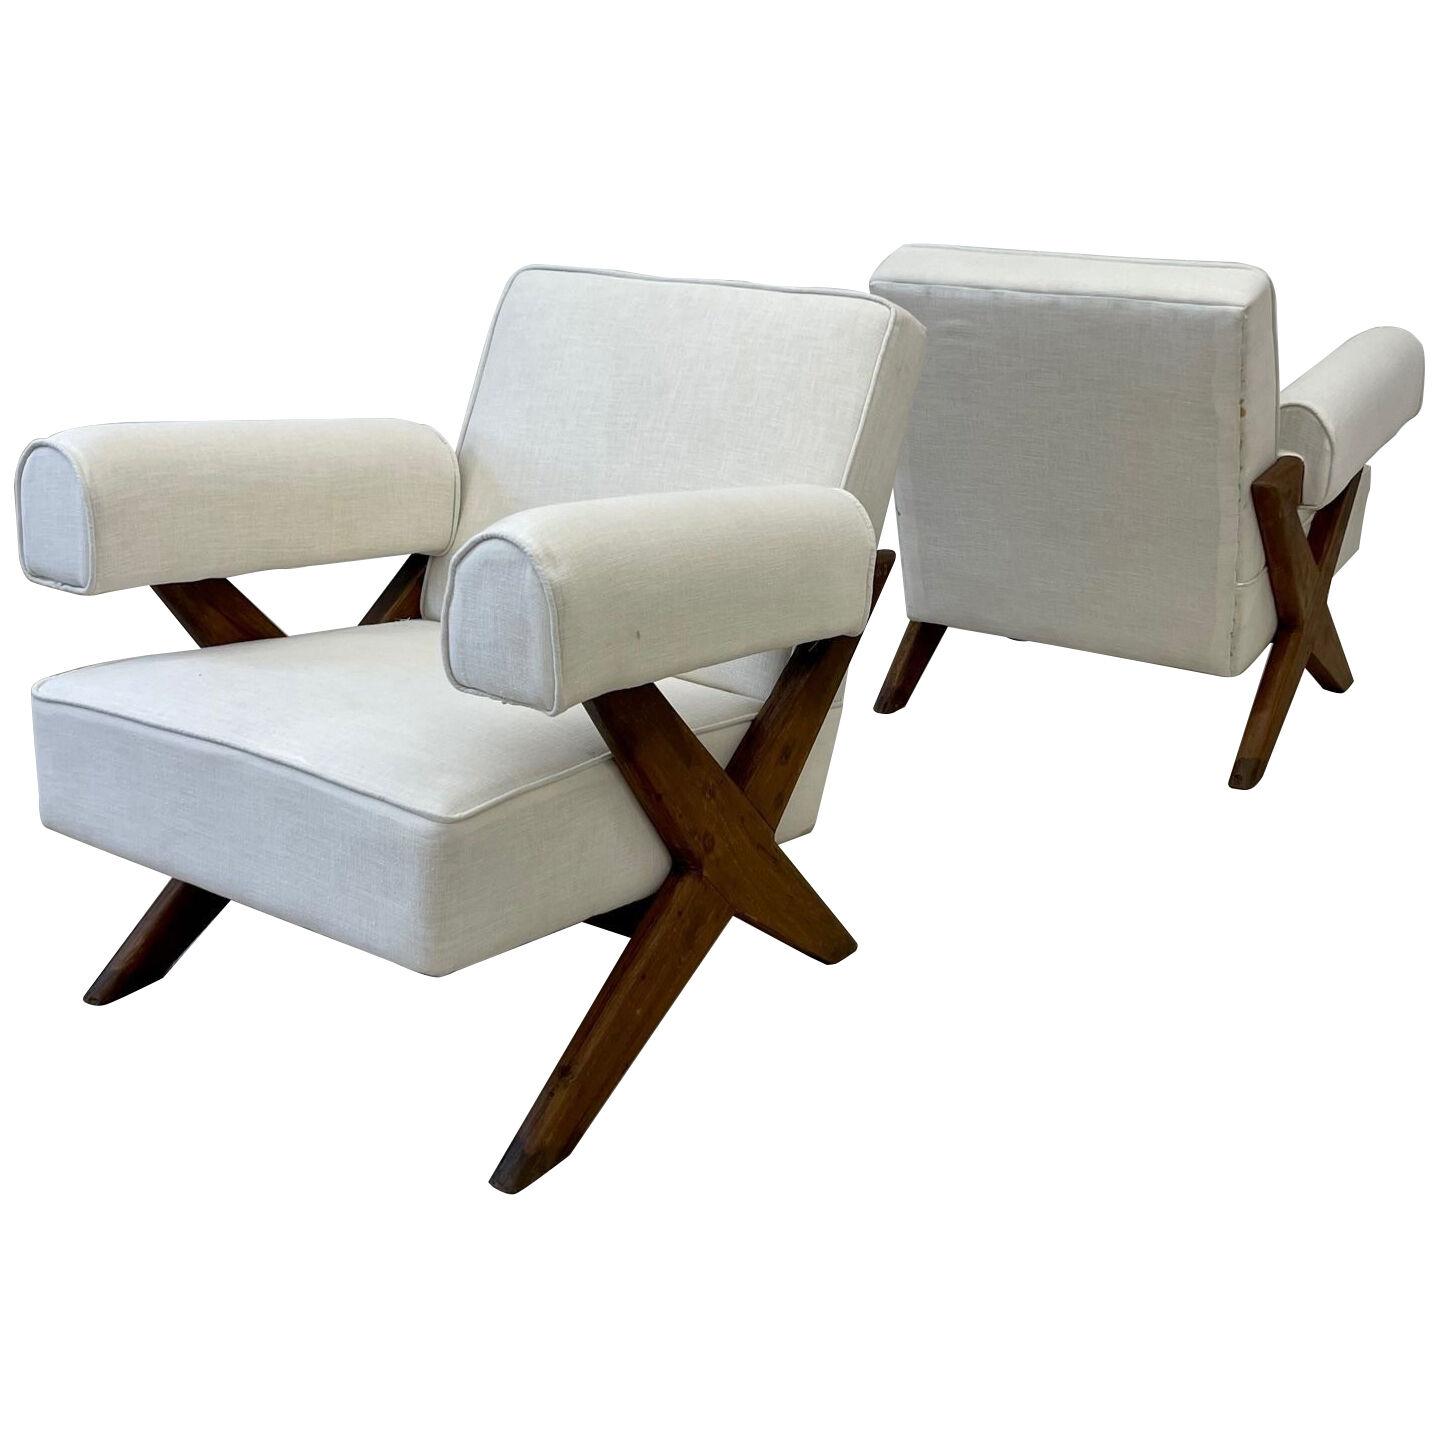 Pair of Pierre Jeanneret X-Leg Upholstered Lounge Chairs, Mid-Century Modern